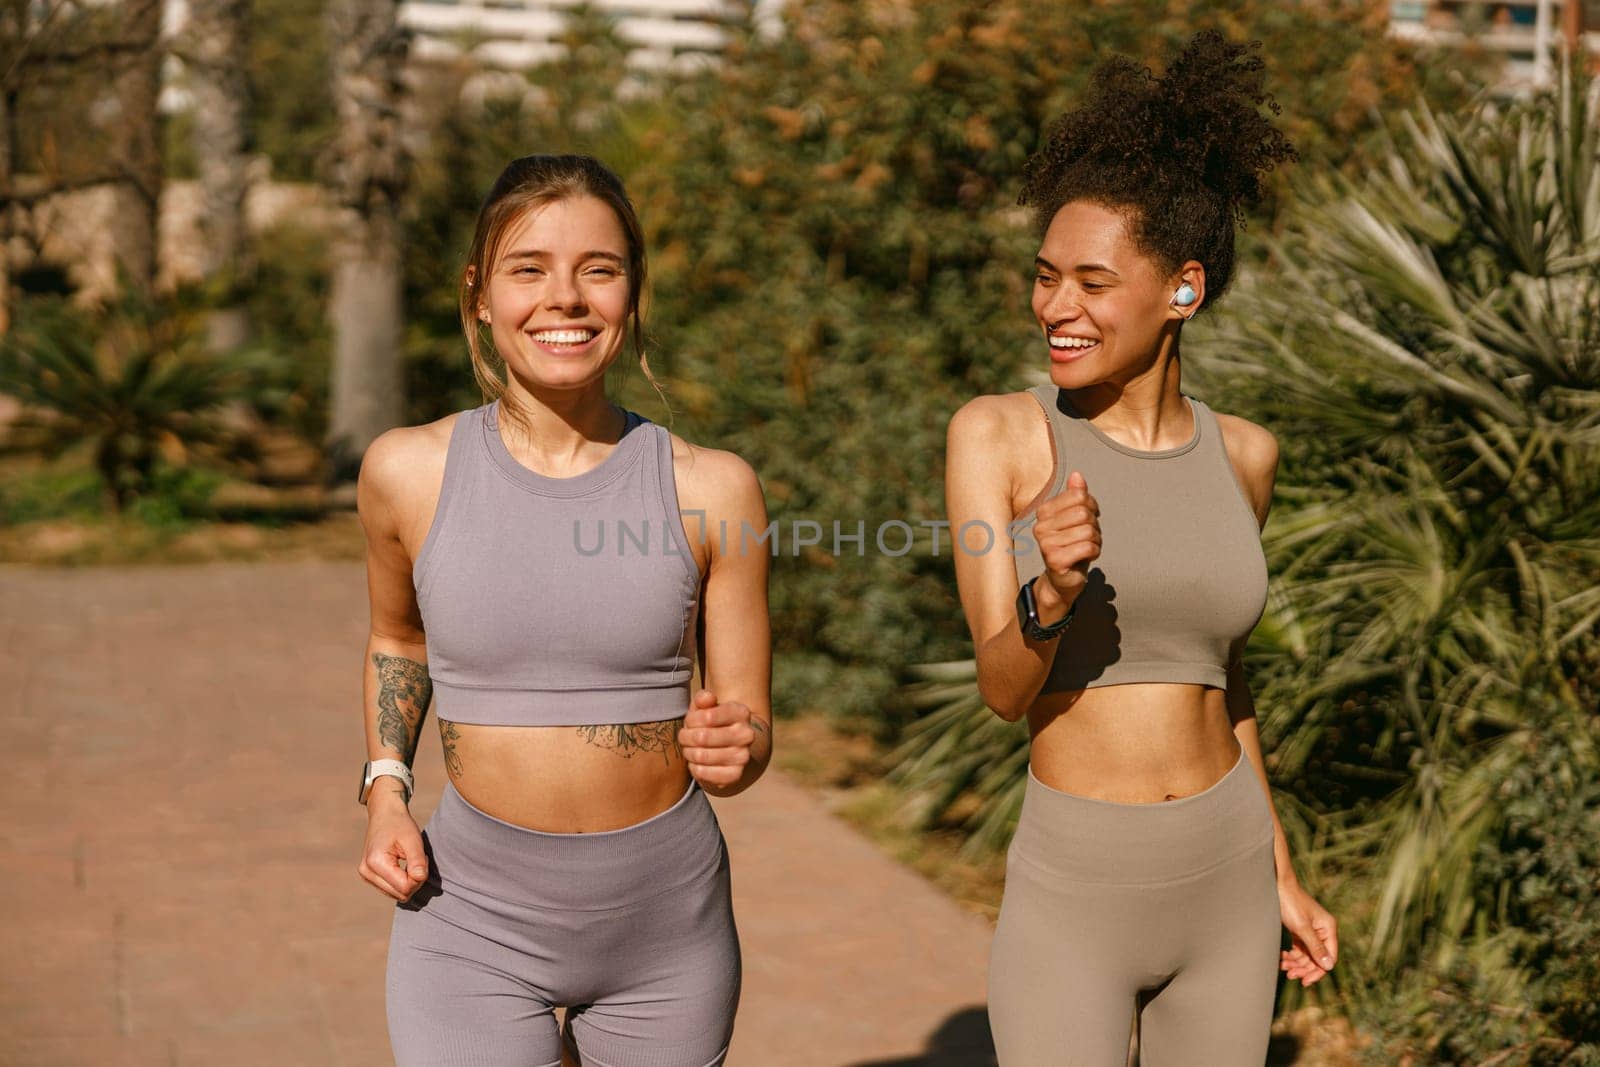 Two young women in sportswear are running on public park background. Active lifestyle concept